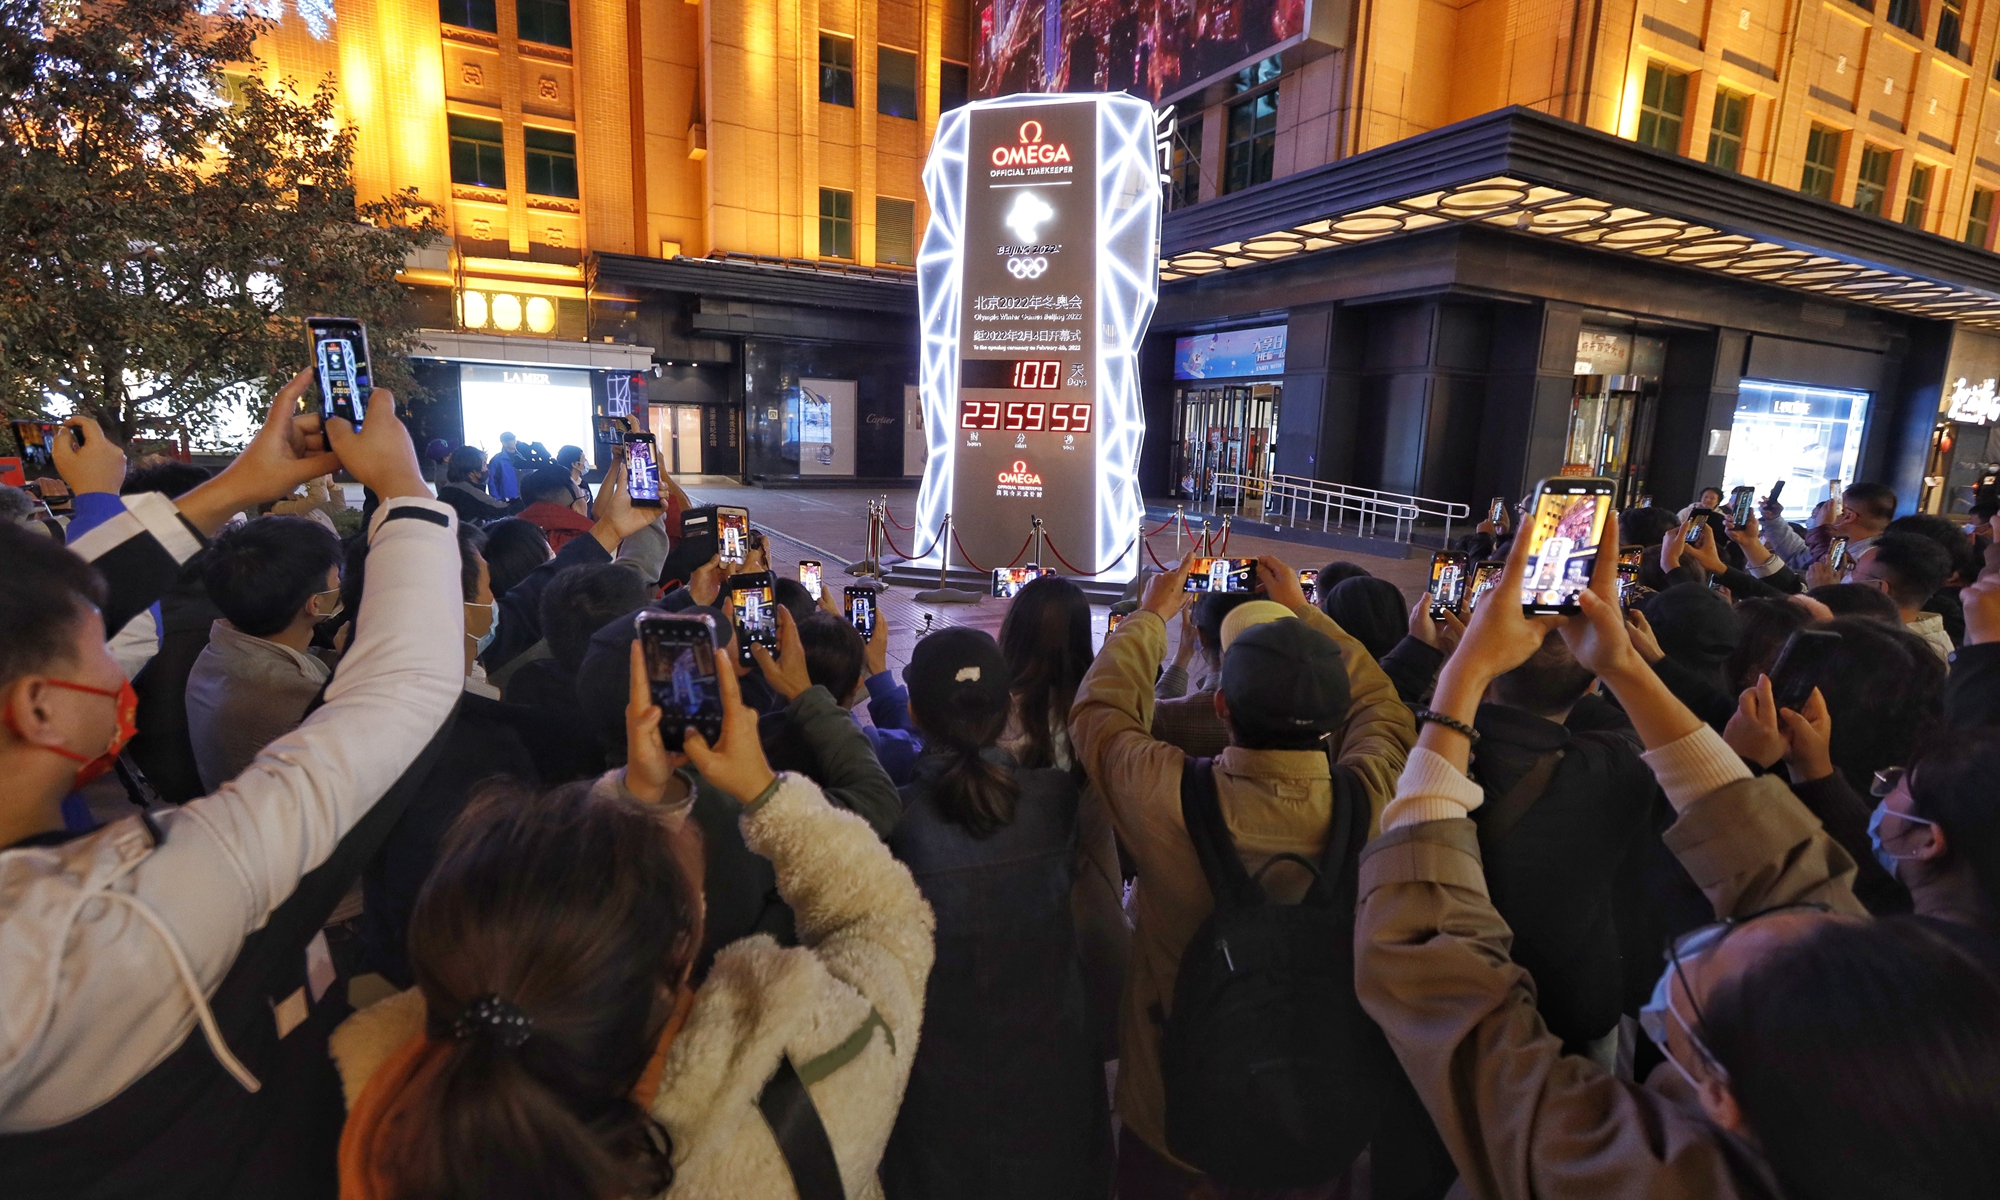 Visitors take pictures in front of the countdown board in downtown Beijing''s Wangfujing Pedestrian Street on October 26, 2021, which marks the 100-day countdown to the 2022 Olympic and Paralympic Winter Games. Photo: Li Hao/Global Times